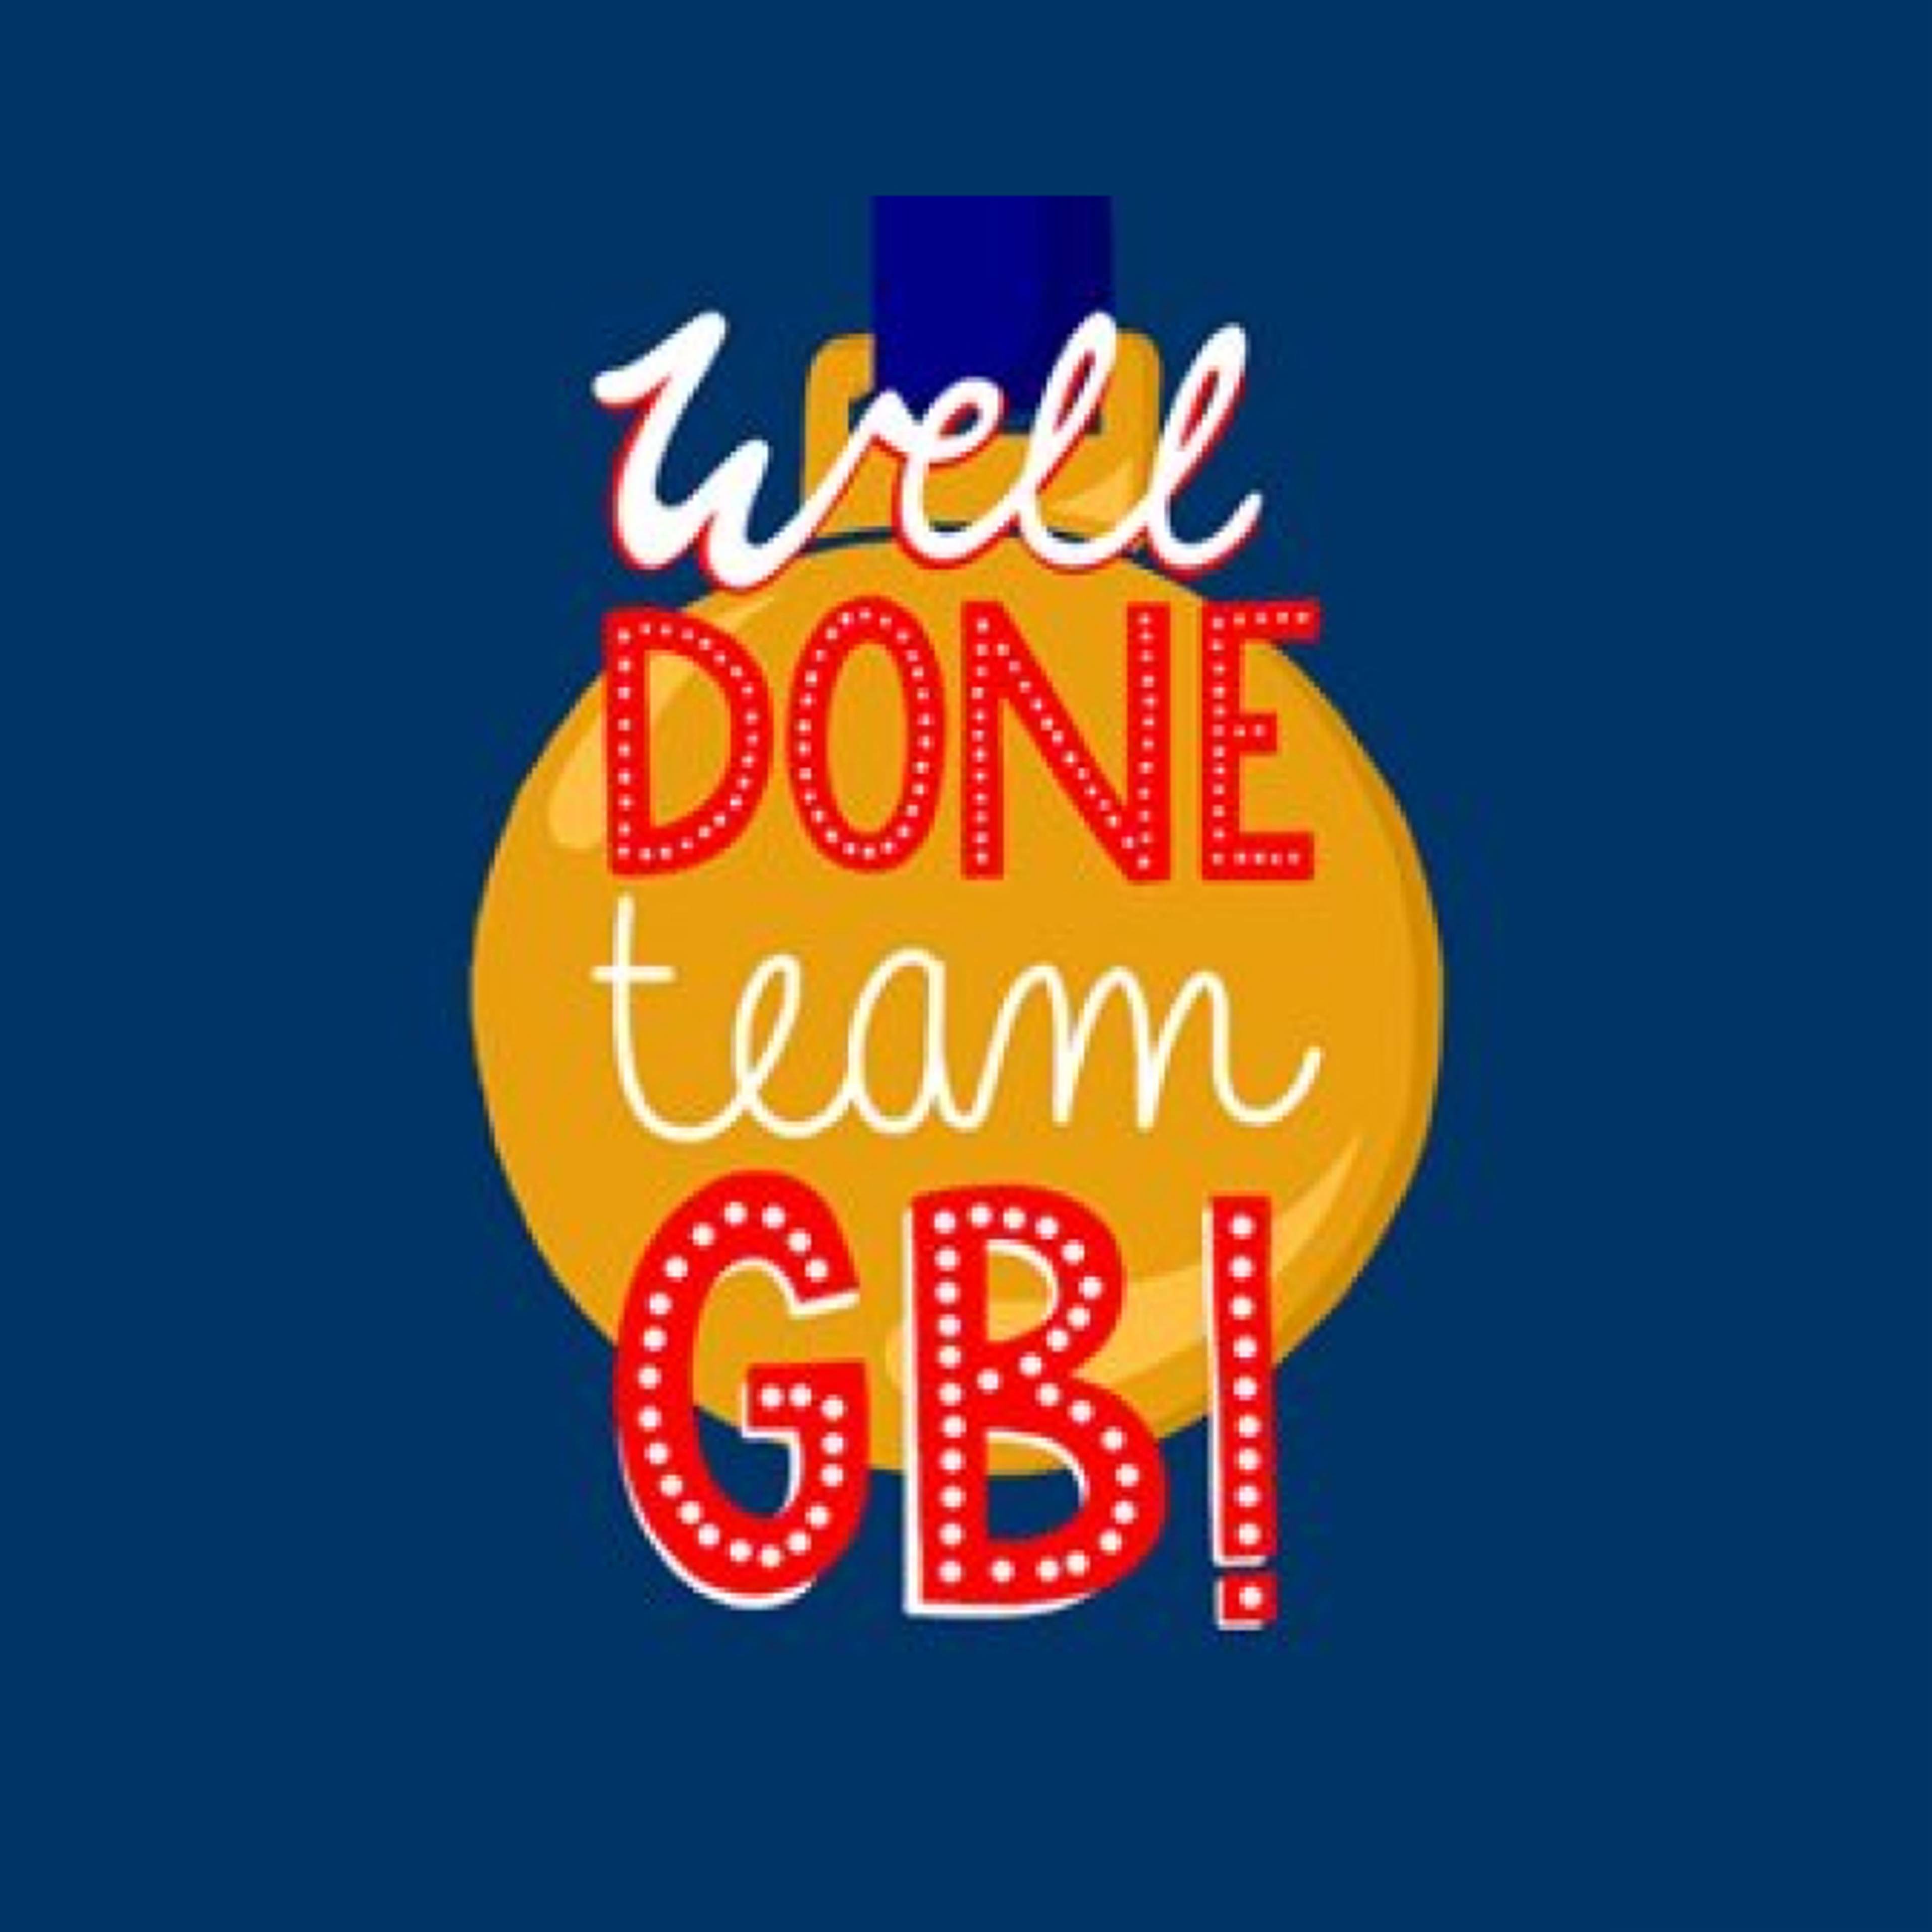 Well Done Team GB image